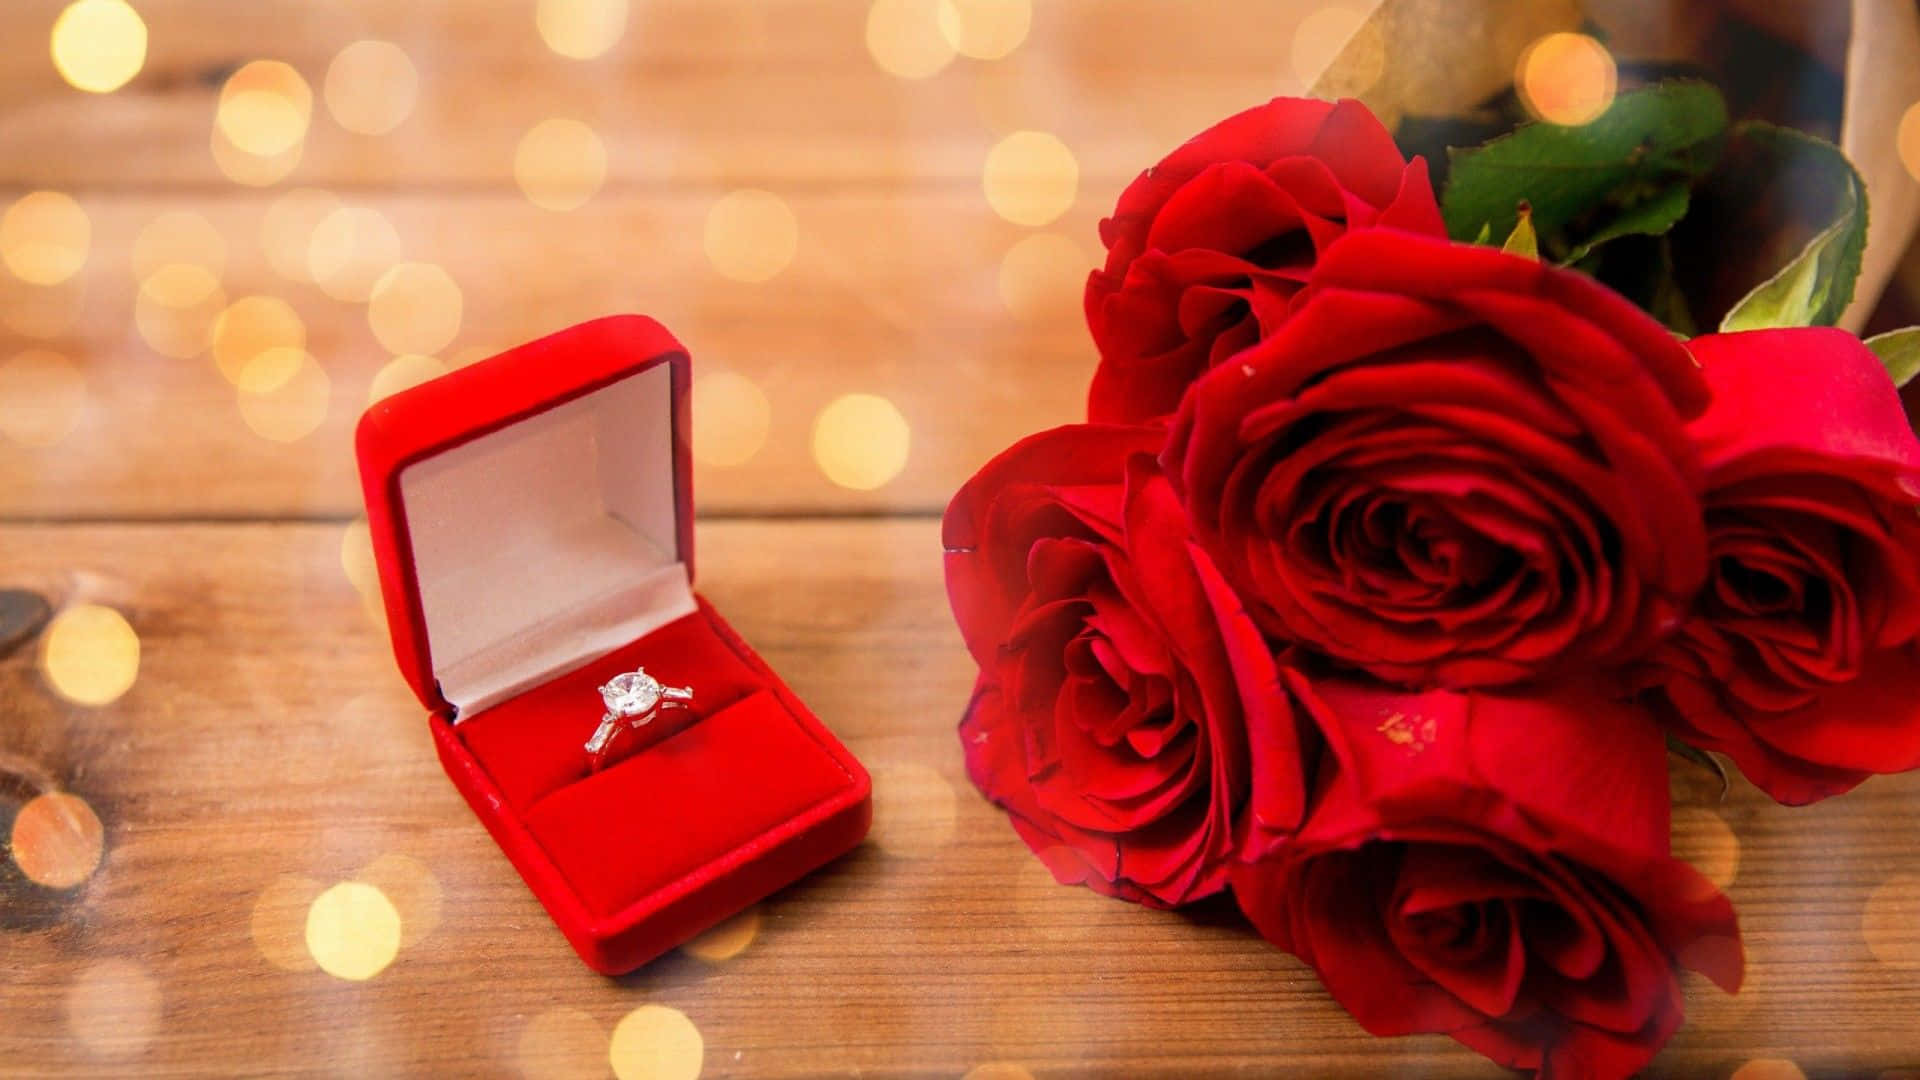 Engagement Ring On A Box Picture